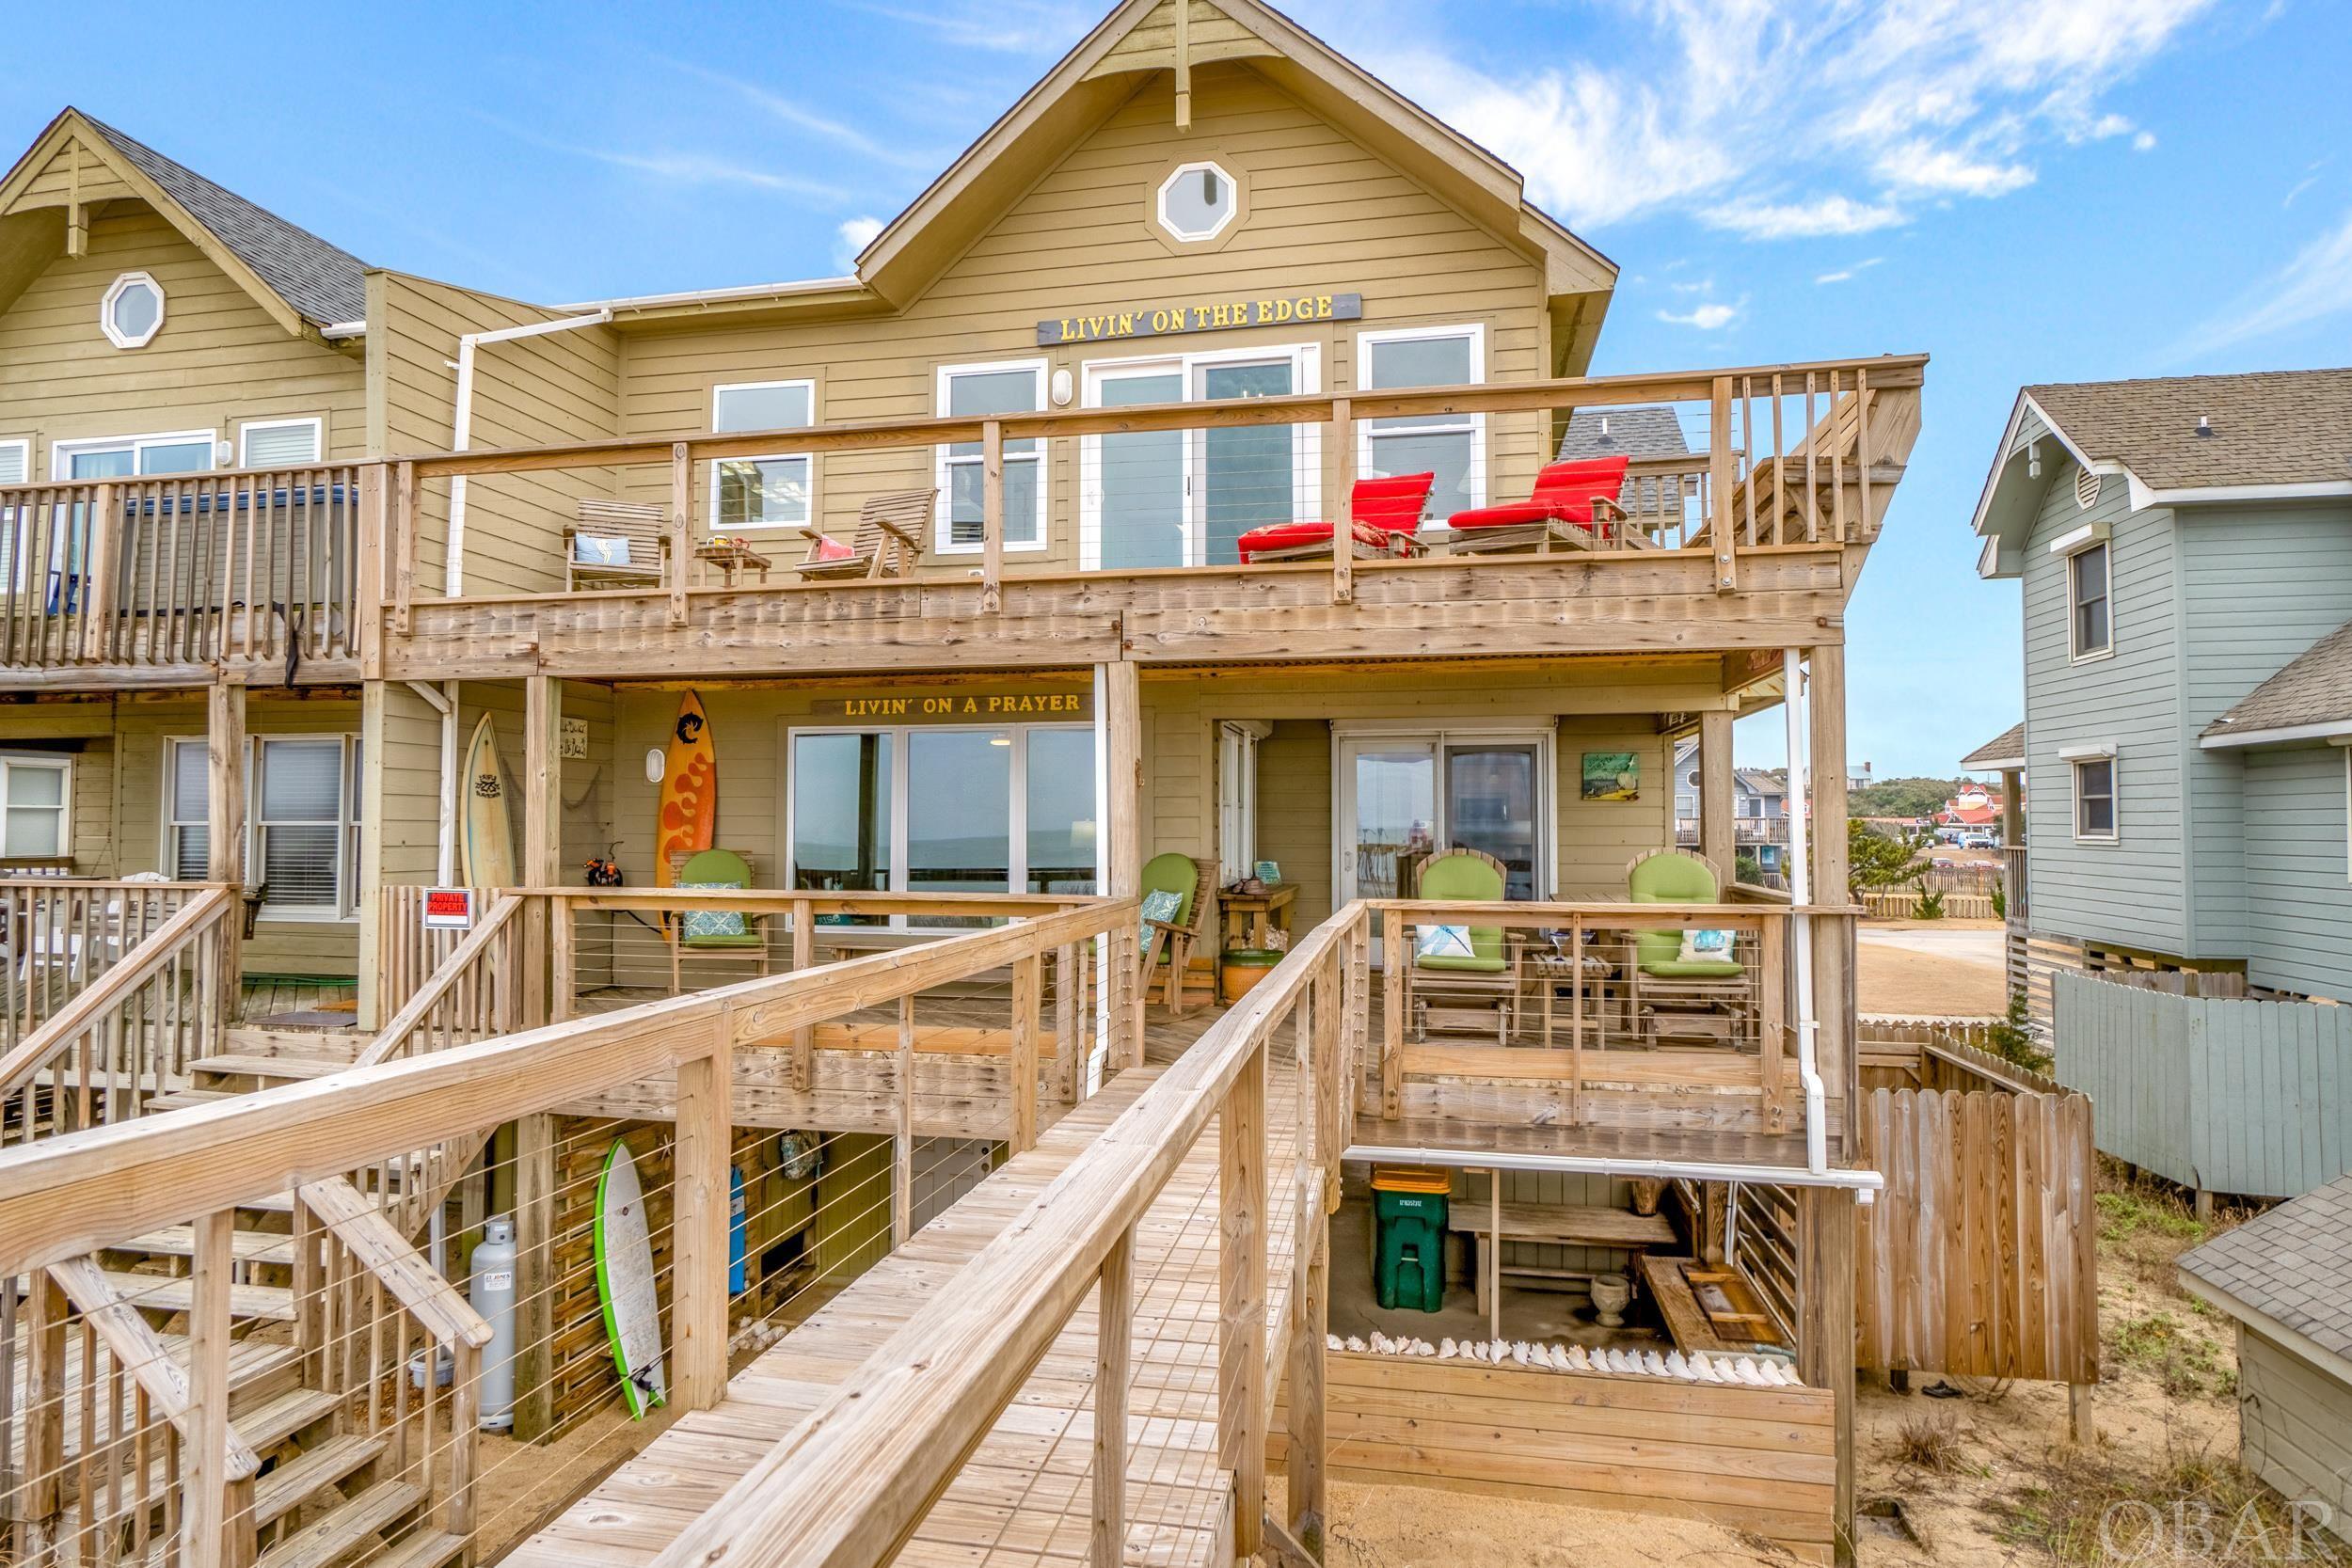 open house Saturday 10-3 AND Sunday 11-4  OCEANFRONT!! Arguably the BEST location in the Outer Banks.  Southern Shores is your first hamlet when taking Ocean Blvd. towards Duck and Corolla.  Stunning 4 bedroom 3.5 bath 2340 sq. ft. townhome style condo. This owner occupied home has been masterfully updated with nothing but high end appointments. Kitchen offers leathered granite countertops, soft close cabinets, luxury stainless kitchen Aid appliances, tiled backsplash, pantry, breakfast bar.  Kitchen and dining face east to enjoy your ocean views. The family rooms  palatial oceanfront windows, wine fridge, and granite gas fireplace make this home STAYCATION worthy.  Private "cable railing" beach walkway installed 2018, roof 2019, HVAC 2021, 80 gal. hot water heater, 2018. New windows. Master bedroom struts an unobstructed view of the Atlantic Ocean, vaulted ceiling, and skylight with remote shade.  The master bath with a free standing soaking tub, double vanity, new cabinets, built in make up counter, and walk in tiled shower make this master en-suite showroom ready! Bedrooms 2-4 are spacious most with closet built-ins. New LVP floors throughout the home creates an open air feel. LED lights throughout, numerous closets, new paint, 2 outside secured storage 8X8 AND 4X8, a full workshop, cleaning station with sink, outdoor shower, and 3 decks to enjoy the ocean air. Attention to detail under pinning, blinds throughout, and a home inspection make this home turn key ready.  Optional Southern Shores Civic Association included 3 marinas, beach access, playgrounds and tennis court, soccer field, basketball half court and walking trails. Summer 2022 beach replenishment approved. Pelican Watch is Southern Shores' only OCEANFRONT townhome community, is just north of the iconic Kitty Hawk Pier,  and equidistant from Corolla beaches to Nags Head making it the perfect location. Oh and the sunrises...... simply sublime.   Your watch for the perfect oceanfront home ends here at Pelican Watch!